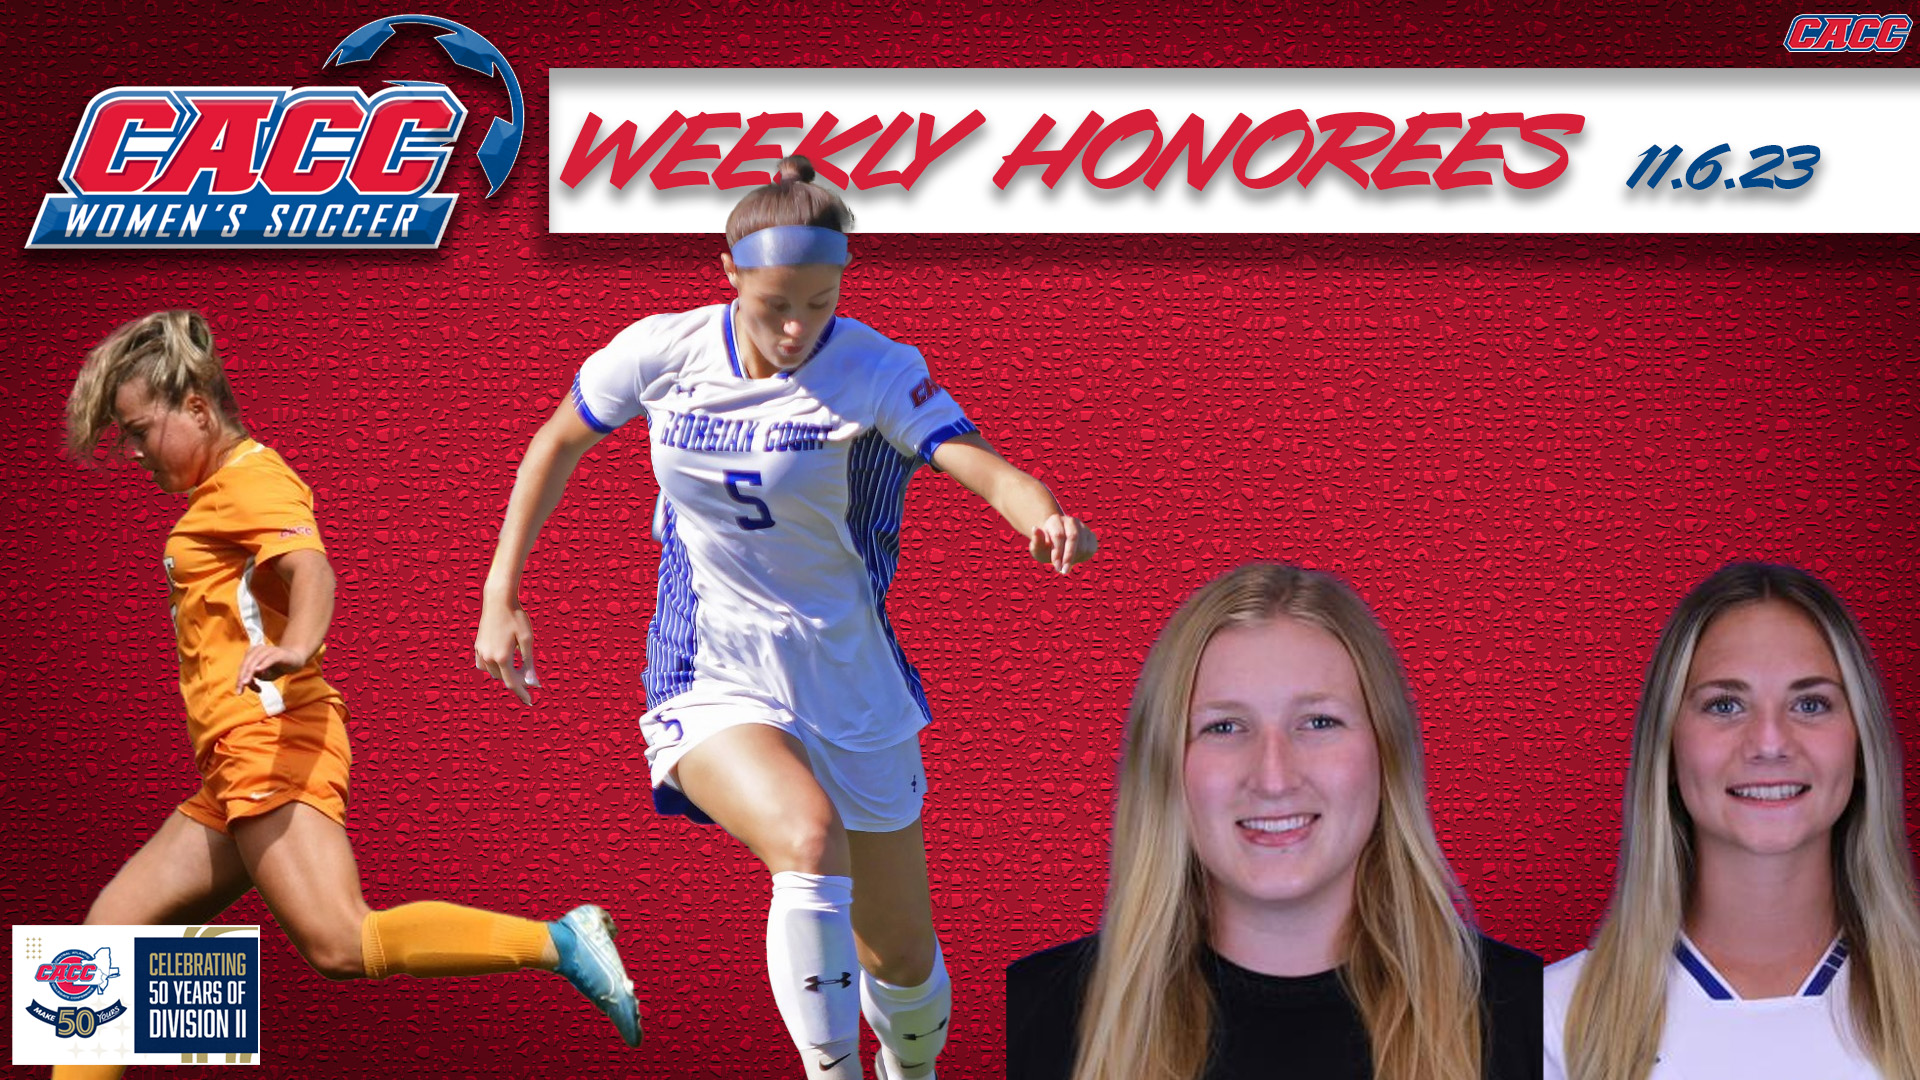 CACC Women's Soccer Weekly Honorees (11-6-23)